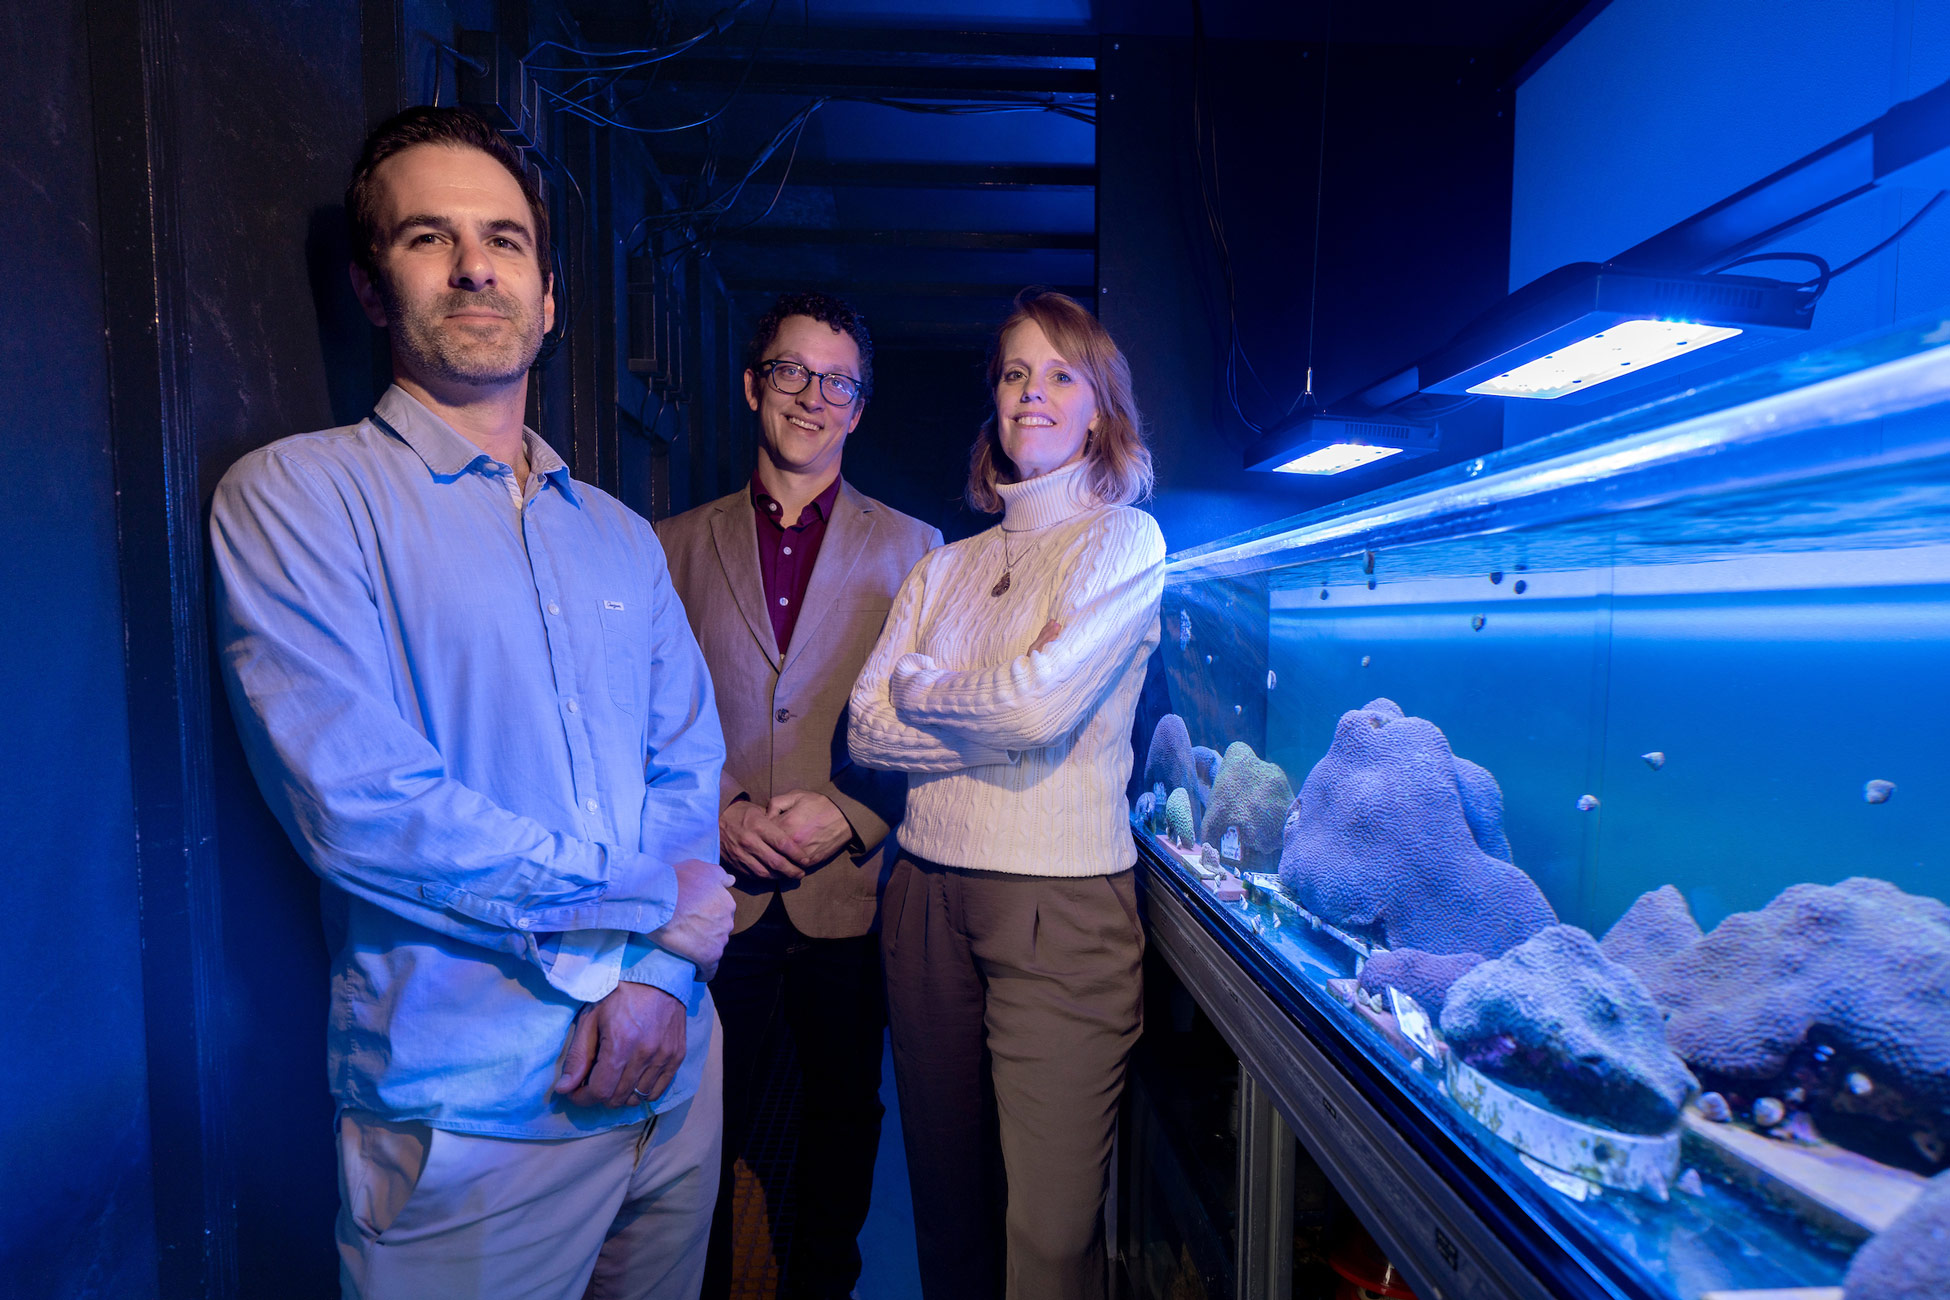 UNCW team of researchers (L to R) Jake Warner, Nathan Crowe and Nicole Fogarty has been awarded a three-year, $1.5 million dollar grant to help corals survive in our warming oceans.